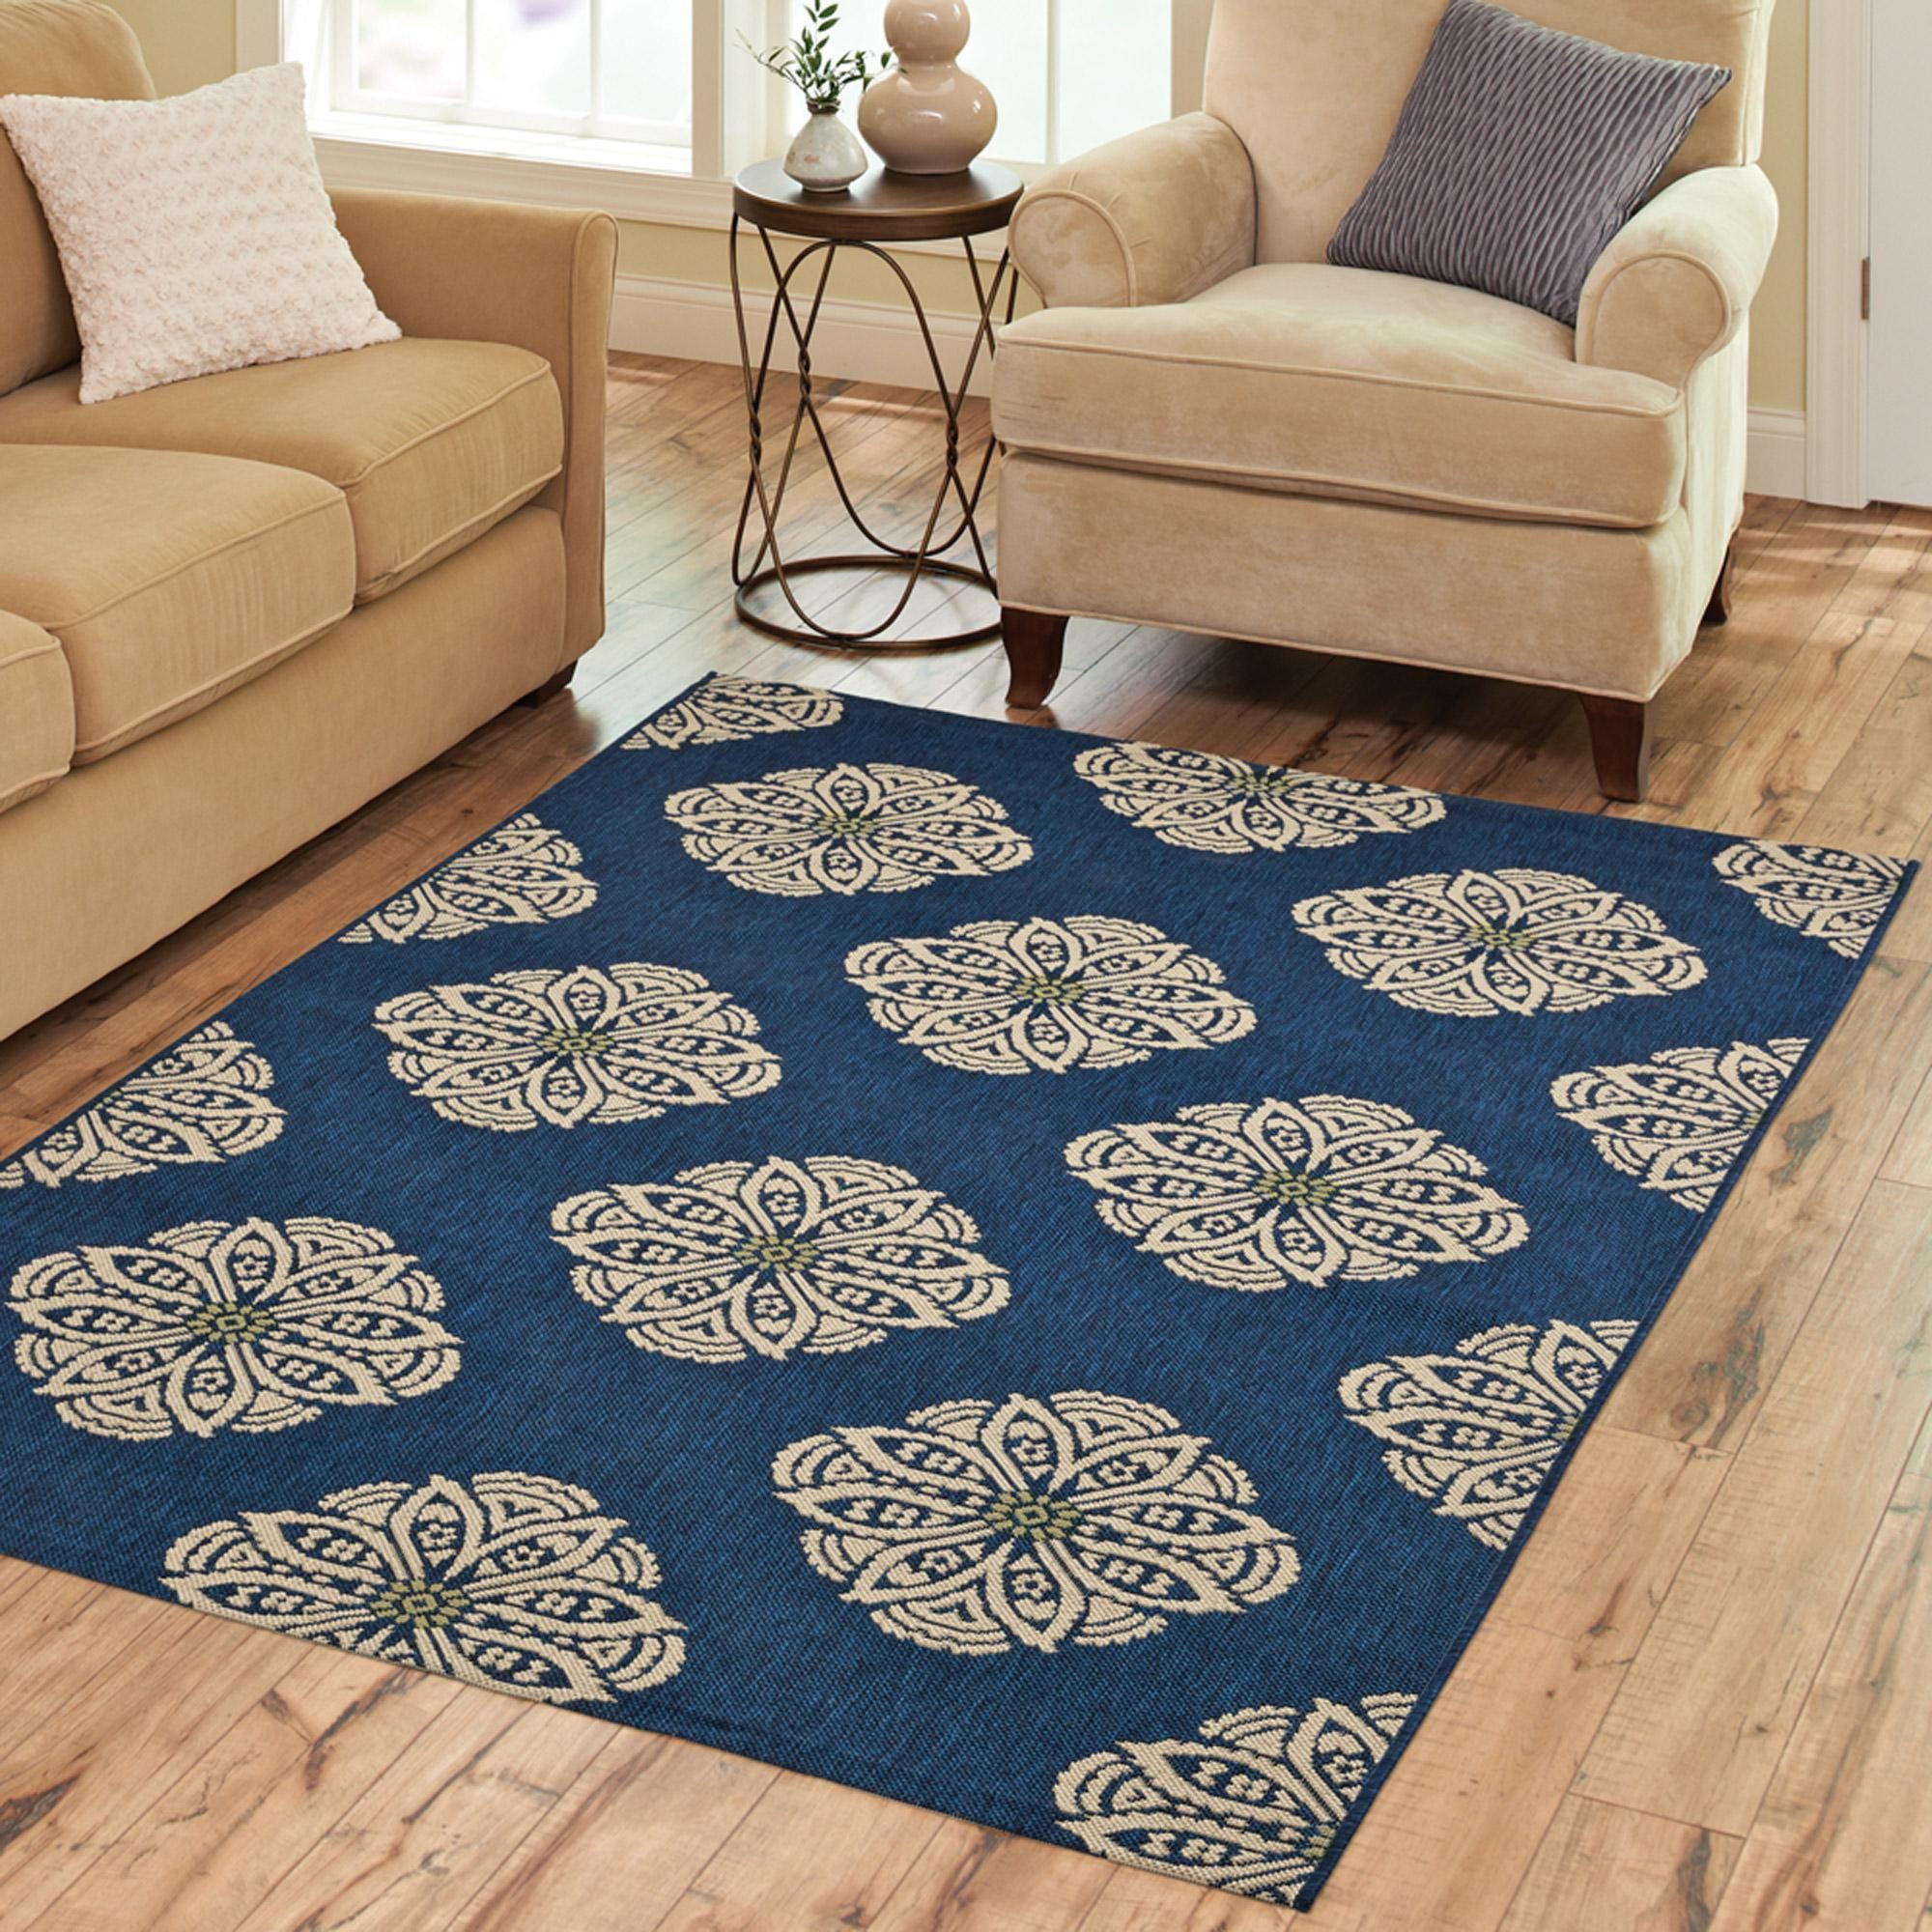 Home Depot Living Room Rugs
 polypropylene rugs with brown sofa and large windows for